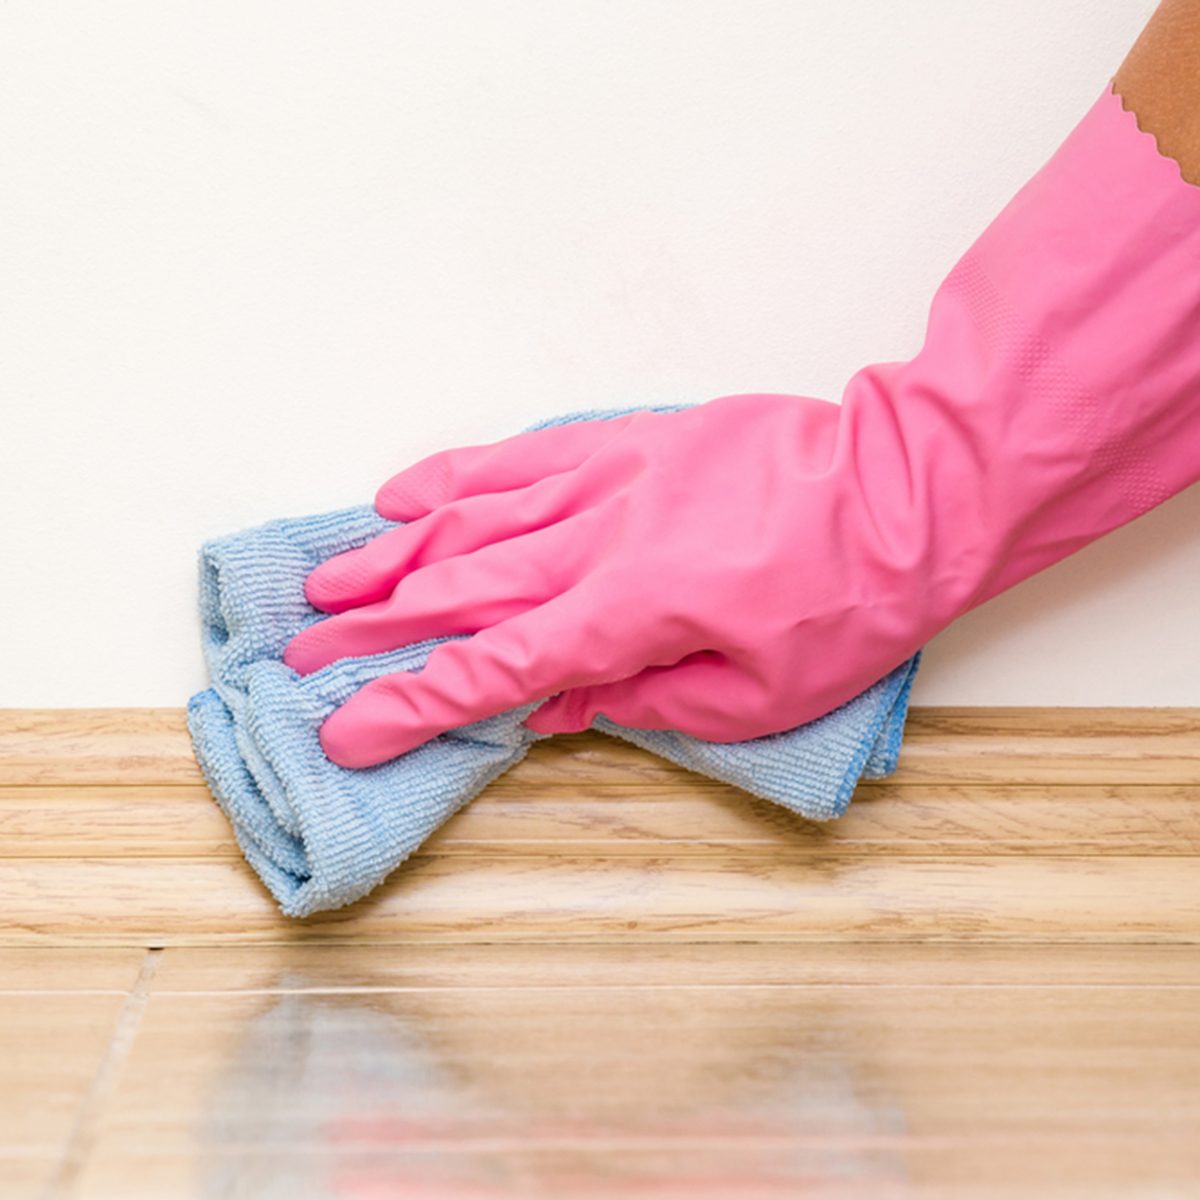 Using a microfiber towel to clean floors instead of the disposable